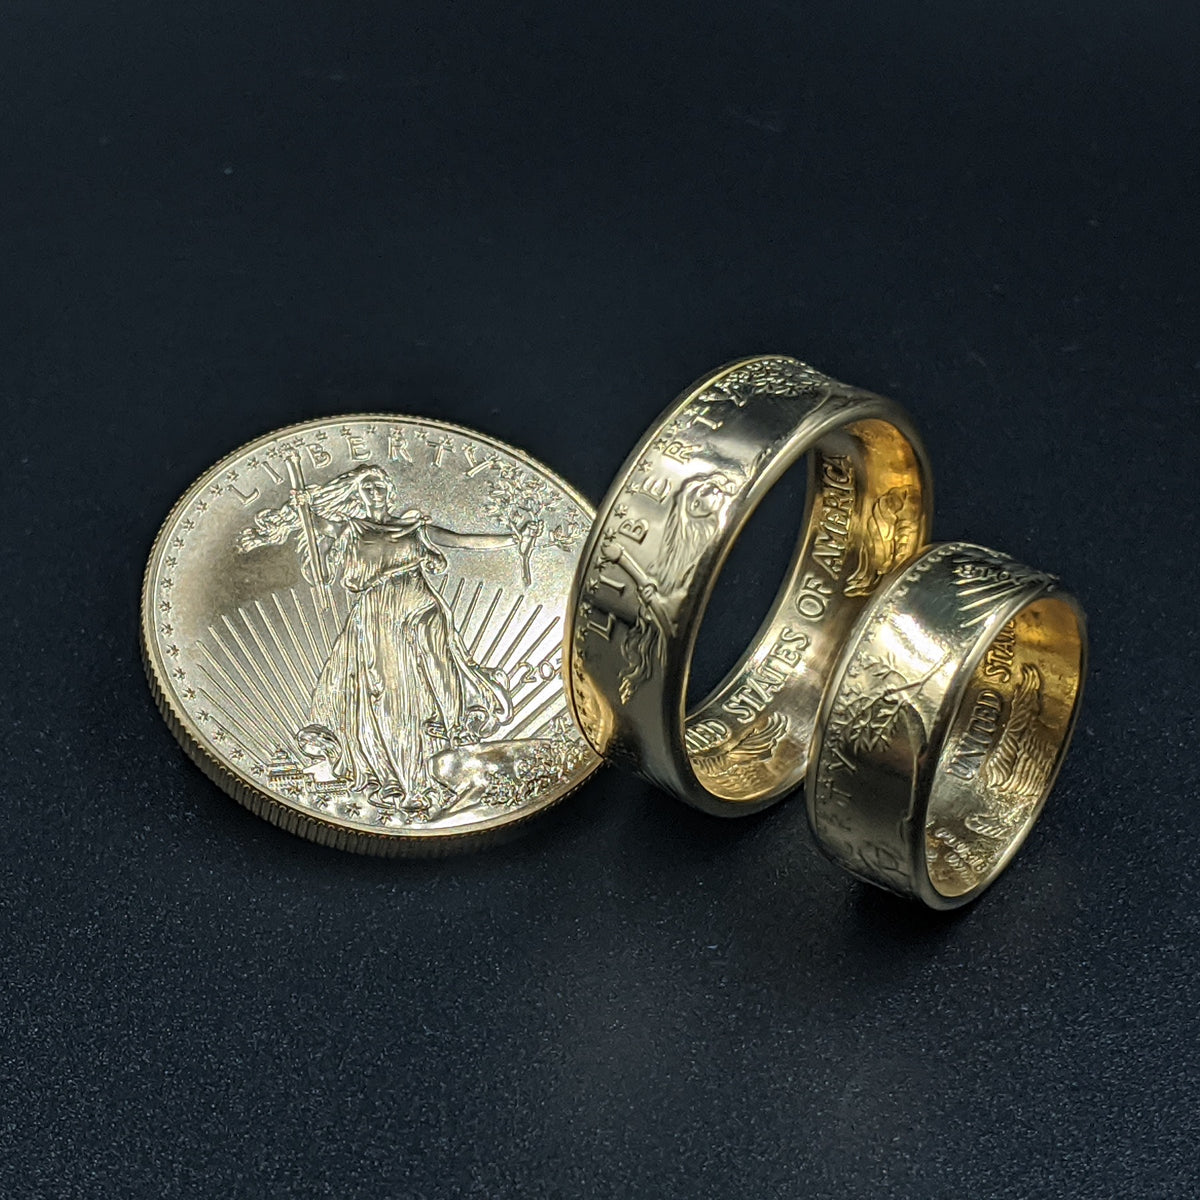 American Gold Eagle wedding band set with gold eagle coin